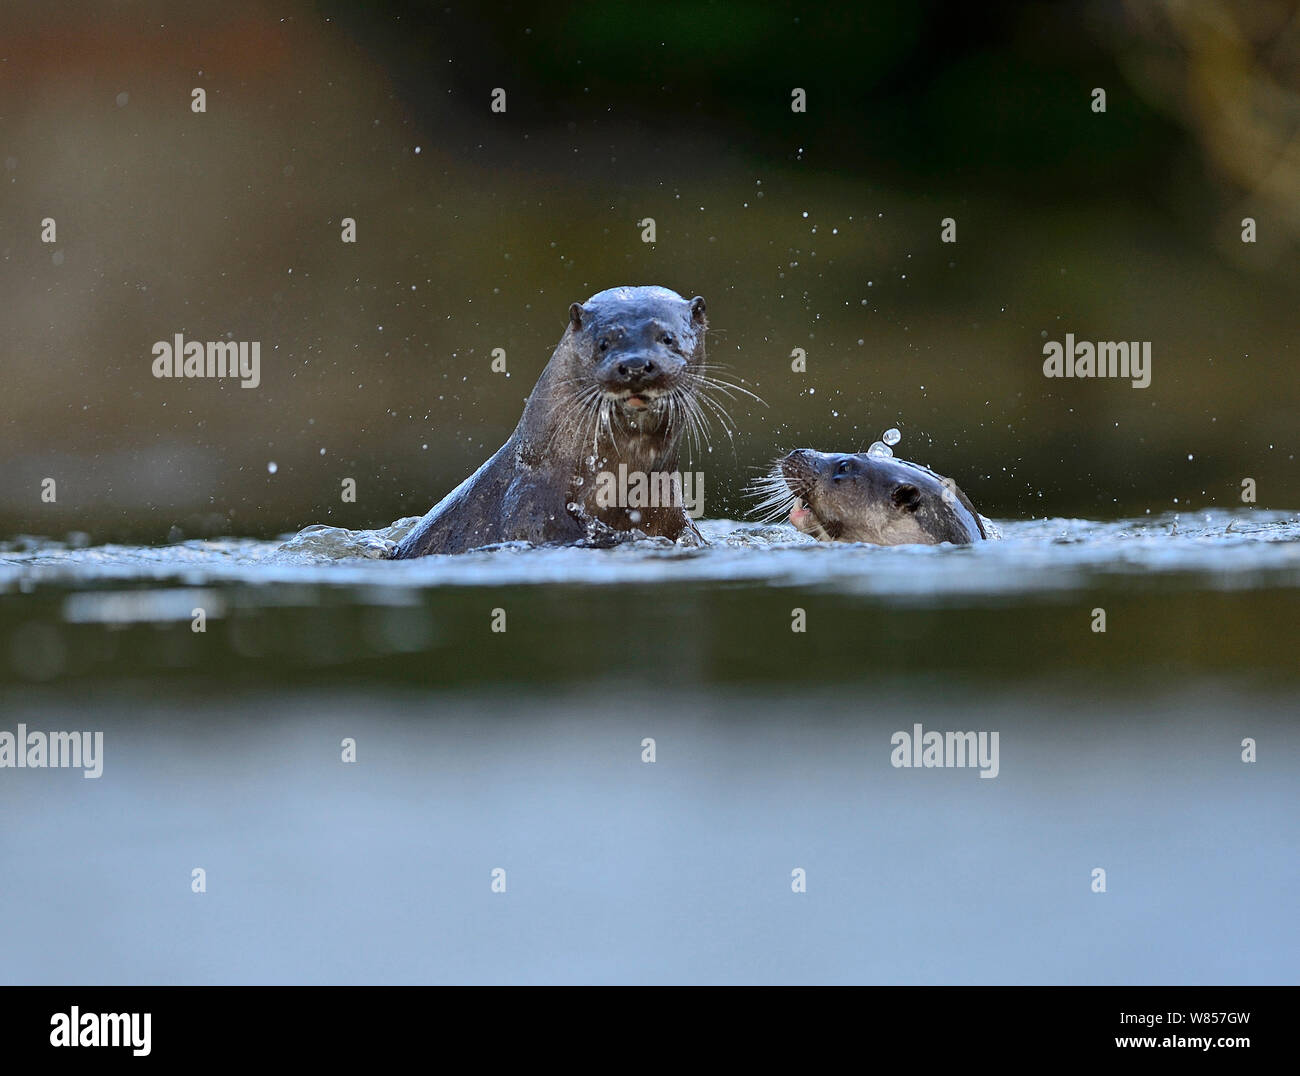 European Otter (Lutra lutra) young adults around 1 year old play fighting in water. River Thet, Thetford, Norfolk, UK, March. Stock Photo